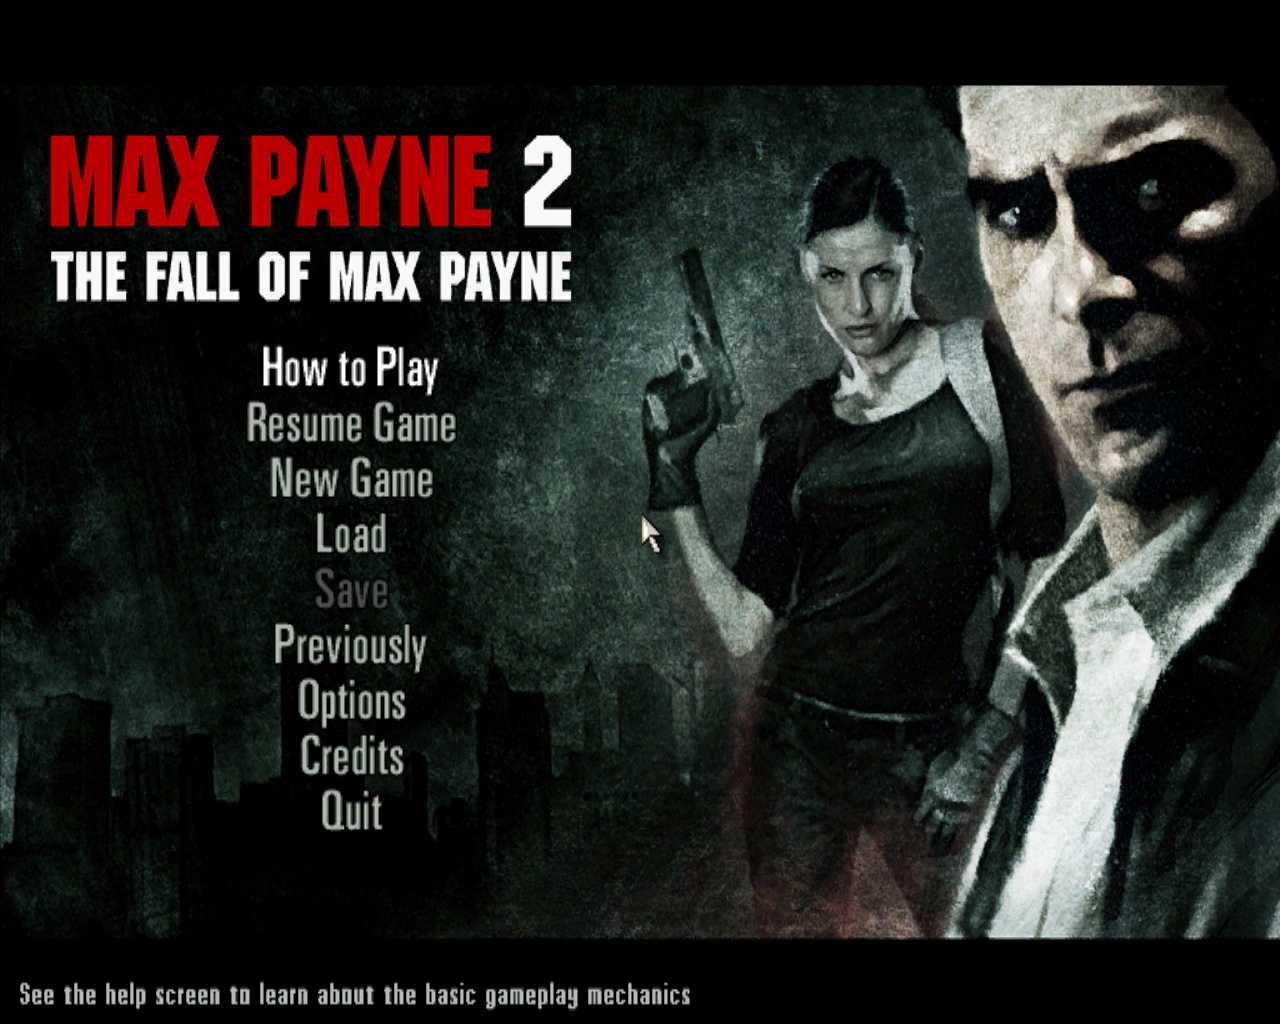 Download Max Payne 2: The Fall of Max Payne for free (Google Drive, 2023, High speed link) 1_resu11